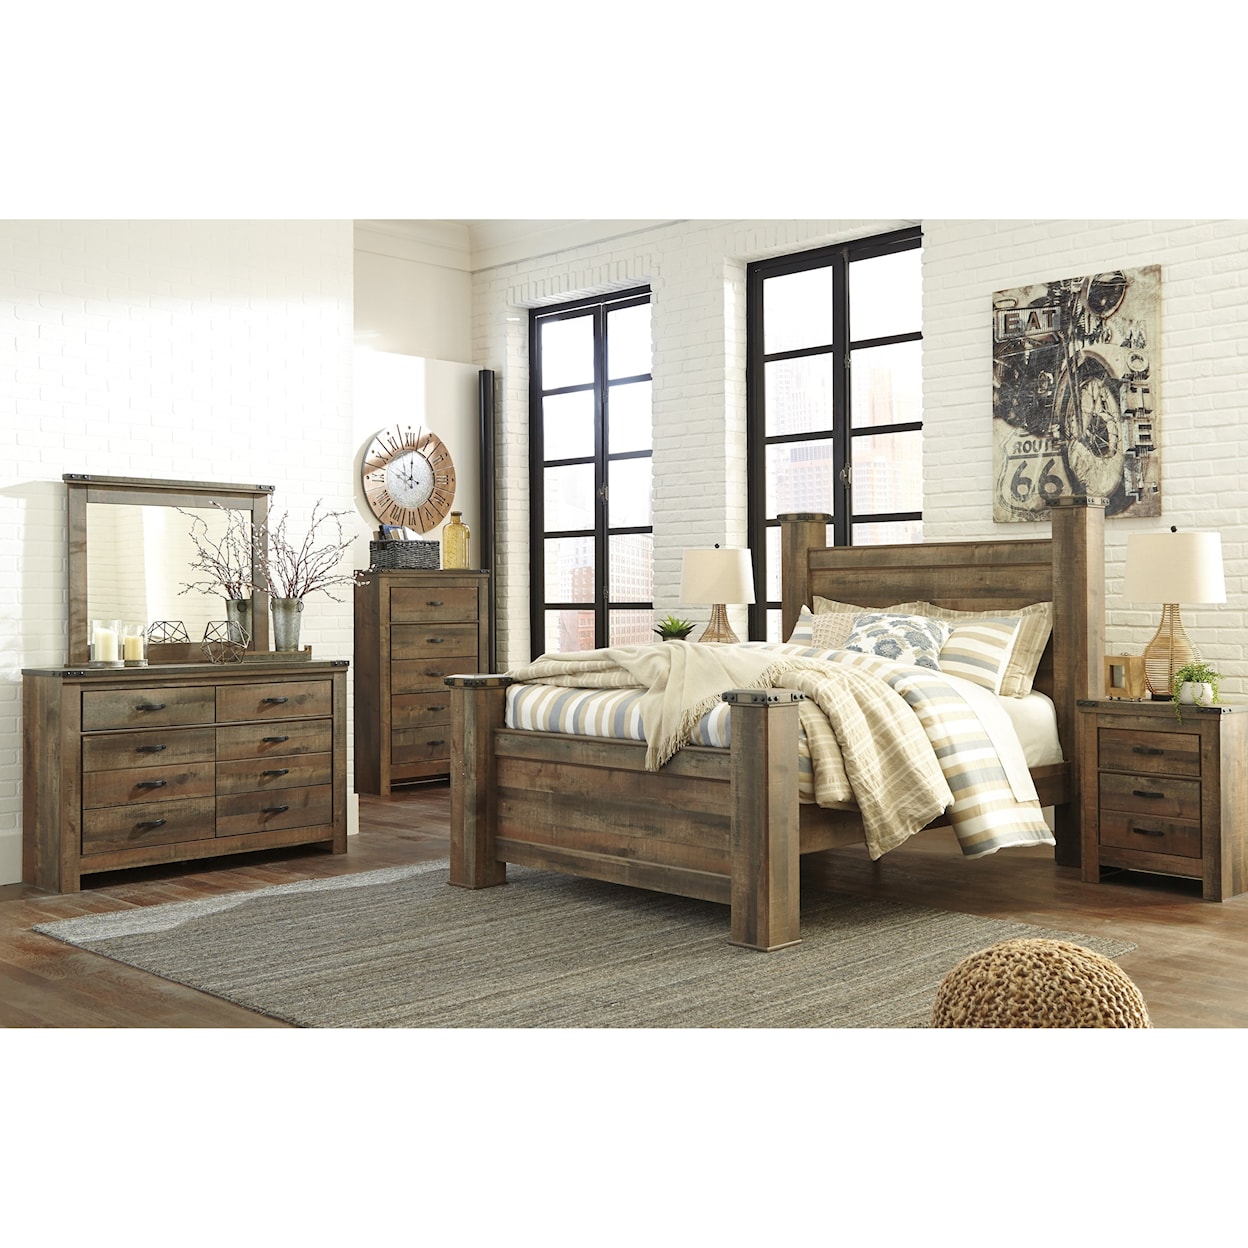 Signature Design by Ashley Vickers Queen Poster Bed